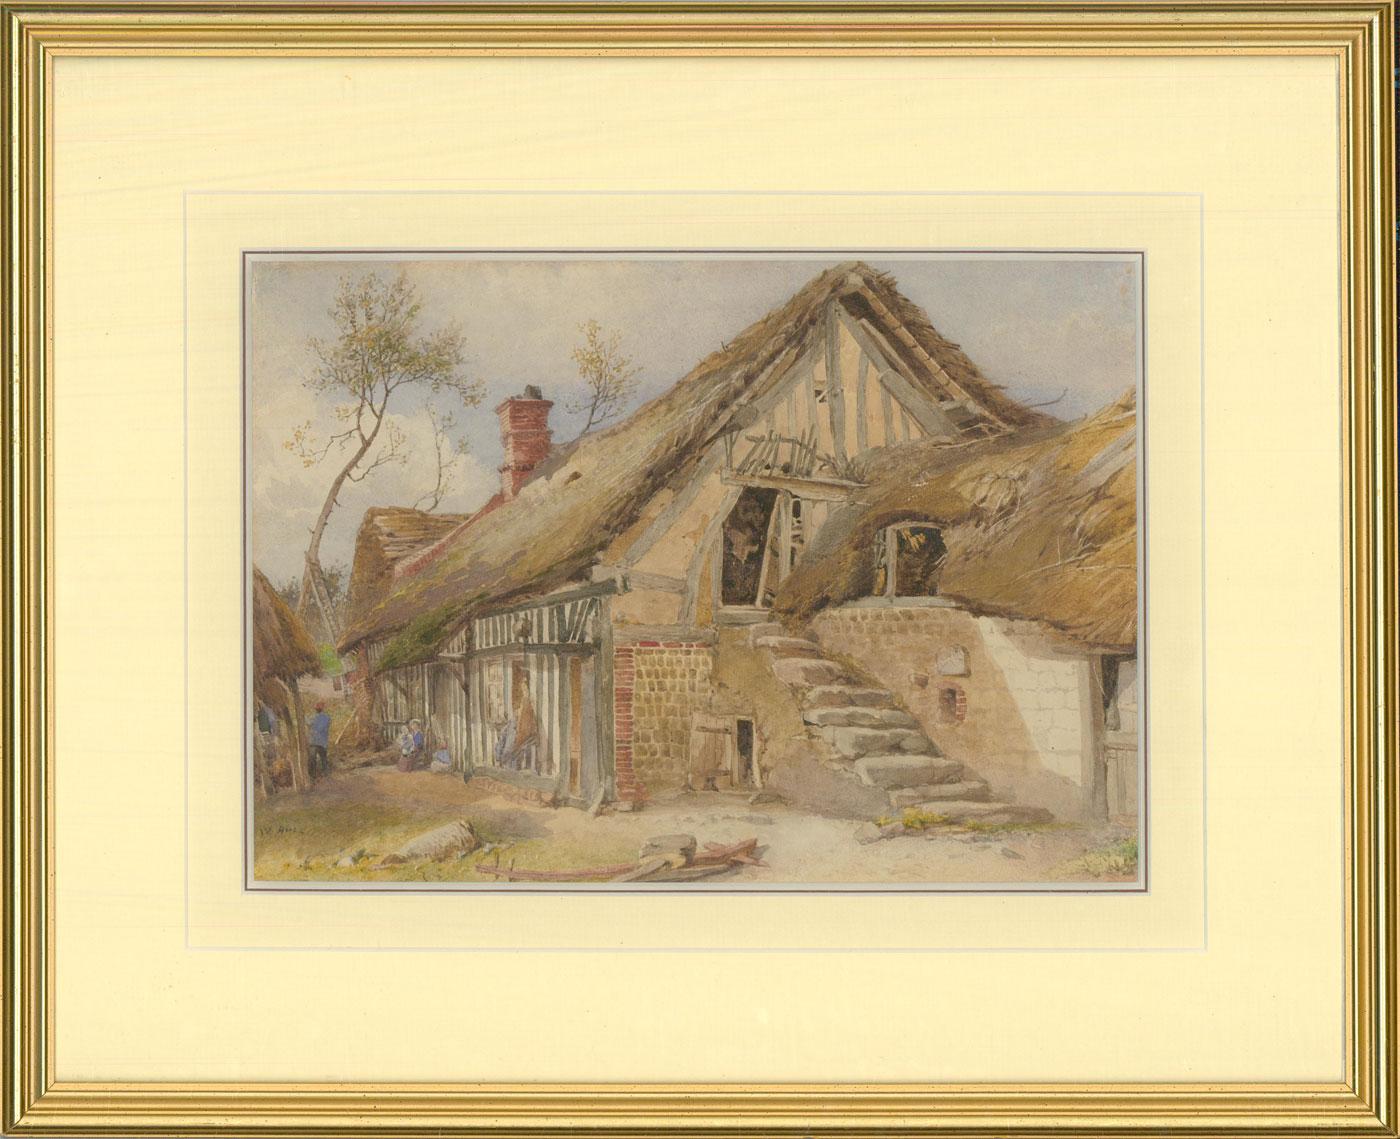 An attractive watercolours study of a rambling thatched cottage by British artist William Hull. A young child can be seen sat on their mother's knee under a porch. While a male figure looks to be taking a break from work, resting up against a wooden